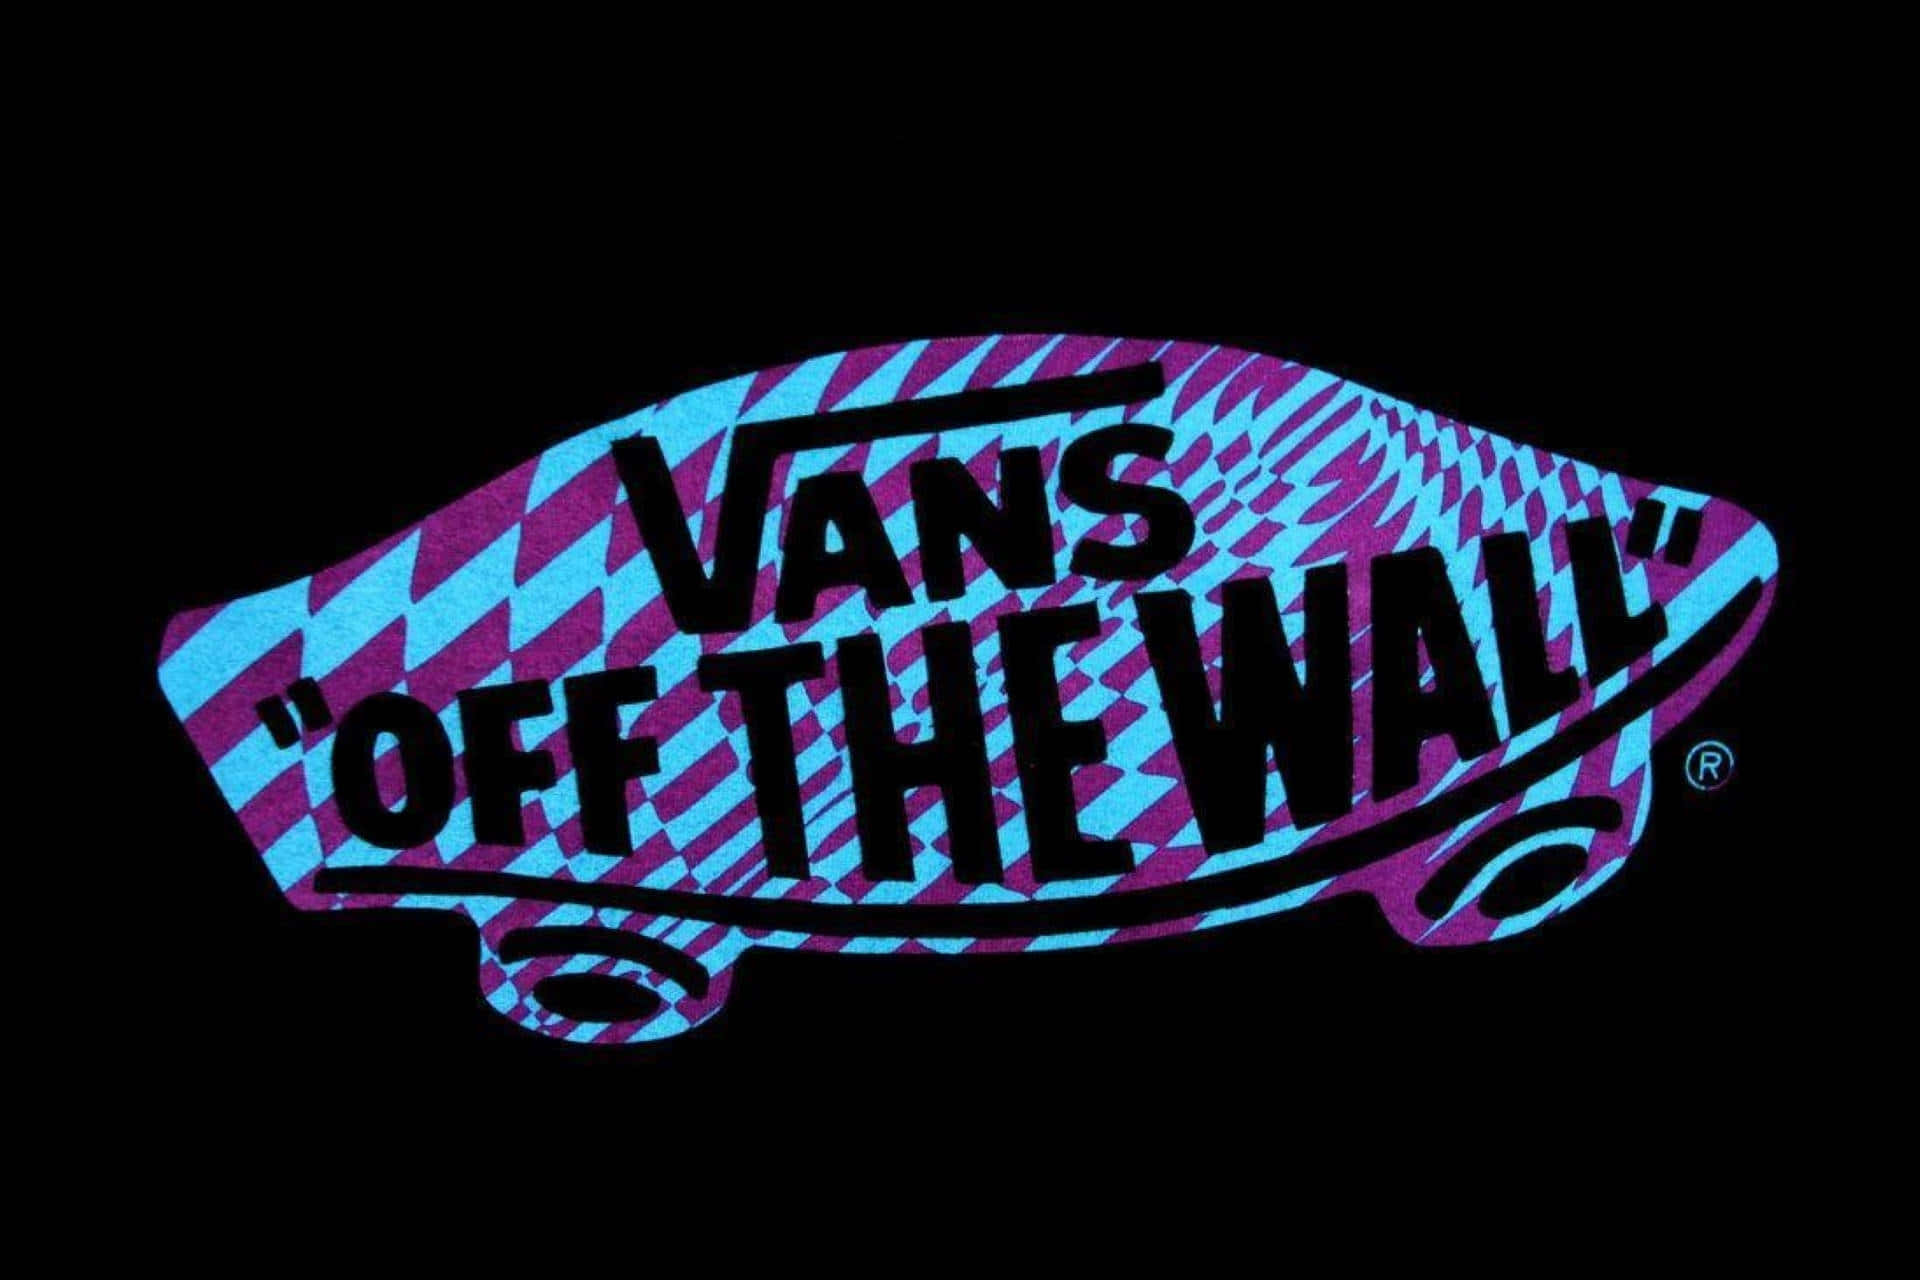 Show your individuality with the iconic cool vans logo Wallpaper